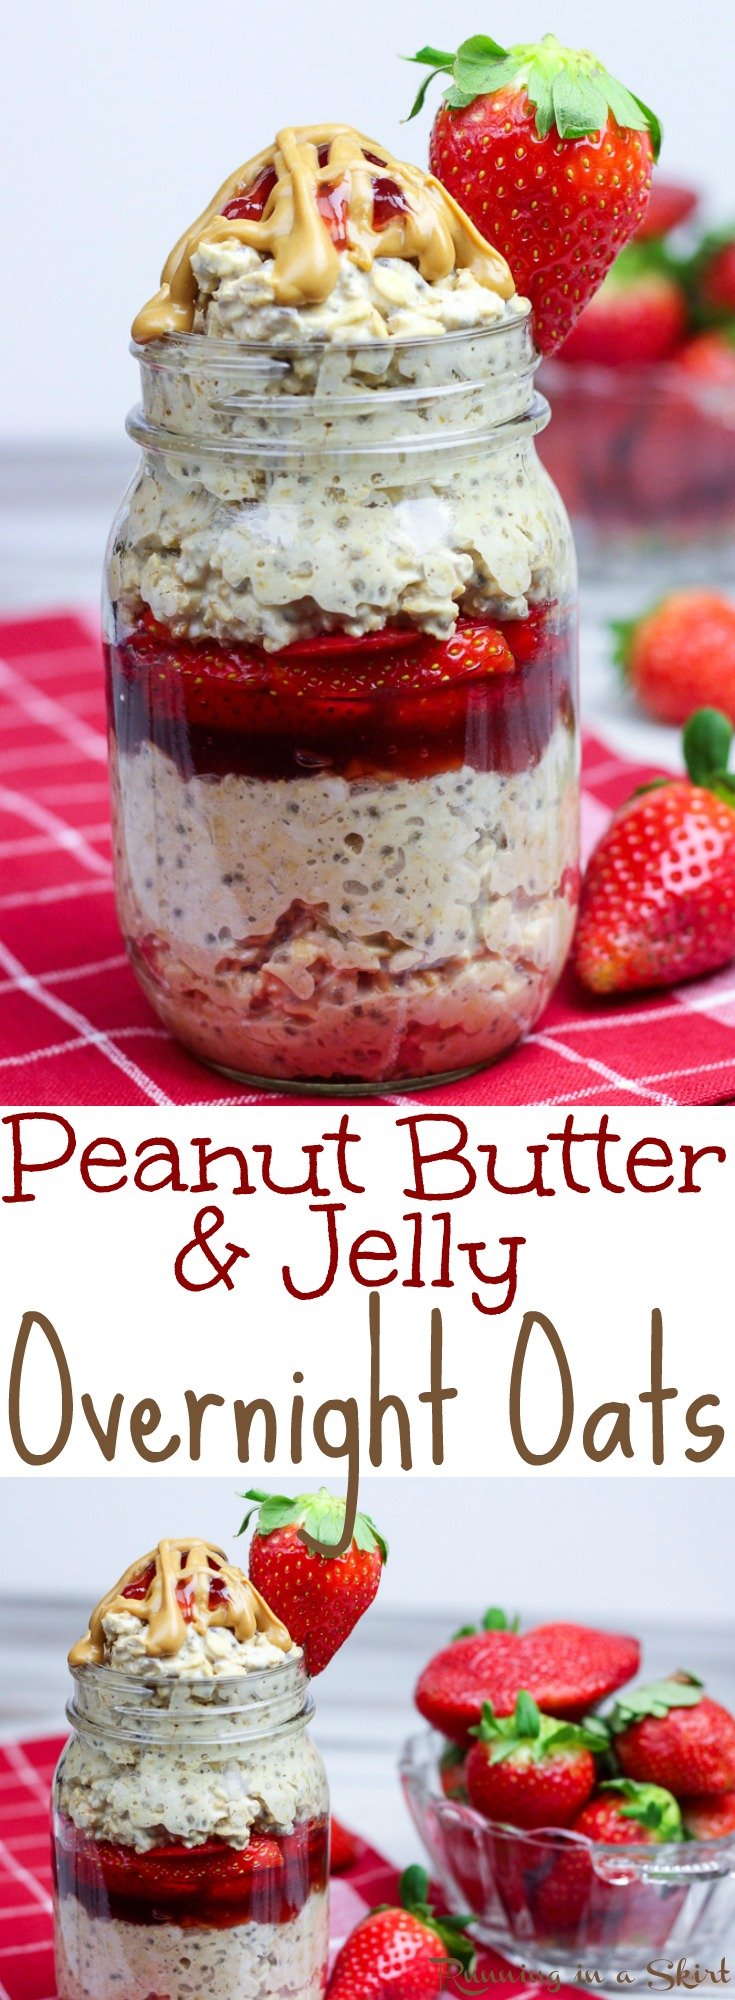 Healthy Peanut Butter and Jelly Overnight Oats recipe in a Jar- easy, only 6 ingredients! Filled with chia seeds, strawberry and oatmeal this is the perfect way to start your mornings for families. Without yogurt making it vegan, dairy free and adaptable to gluten free with the right oats! / Running in a Skirt via @juliewunder